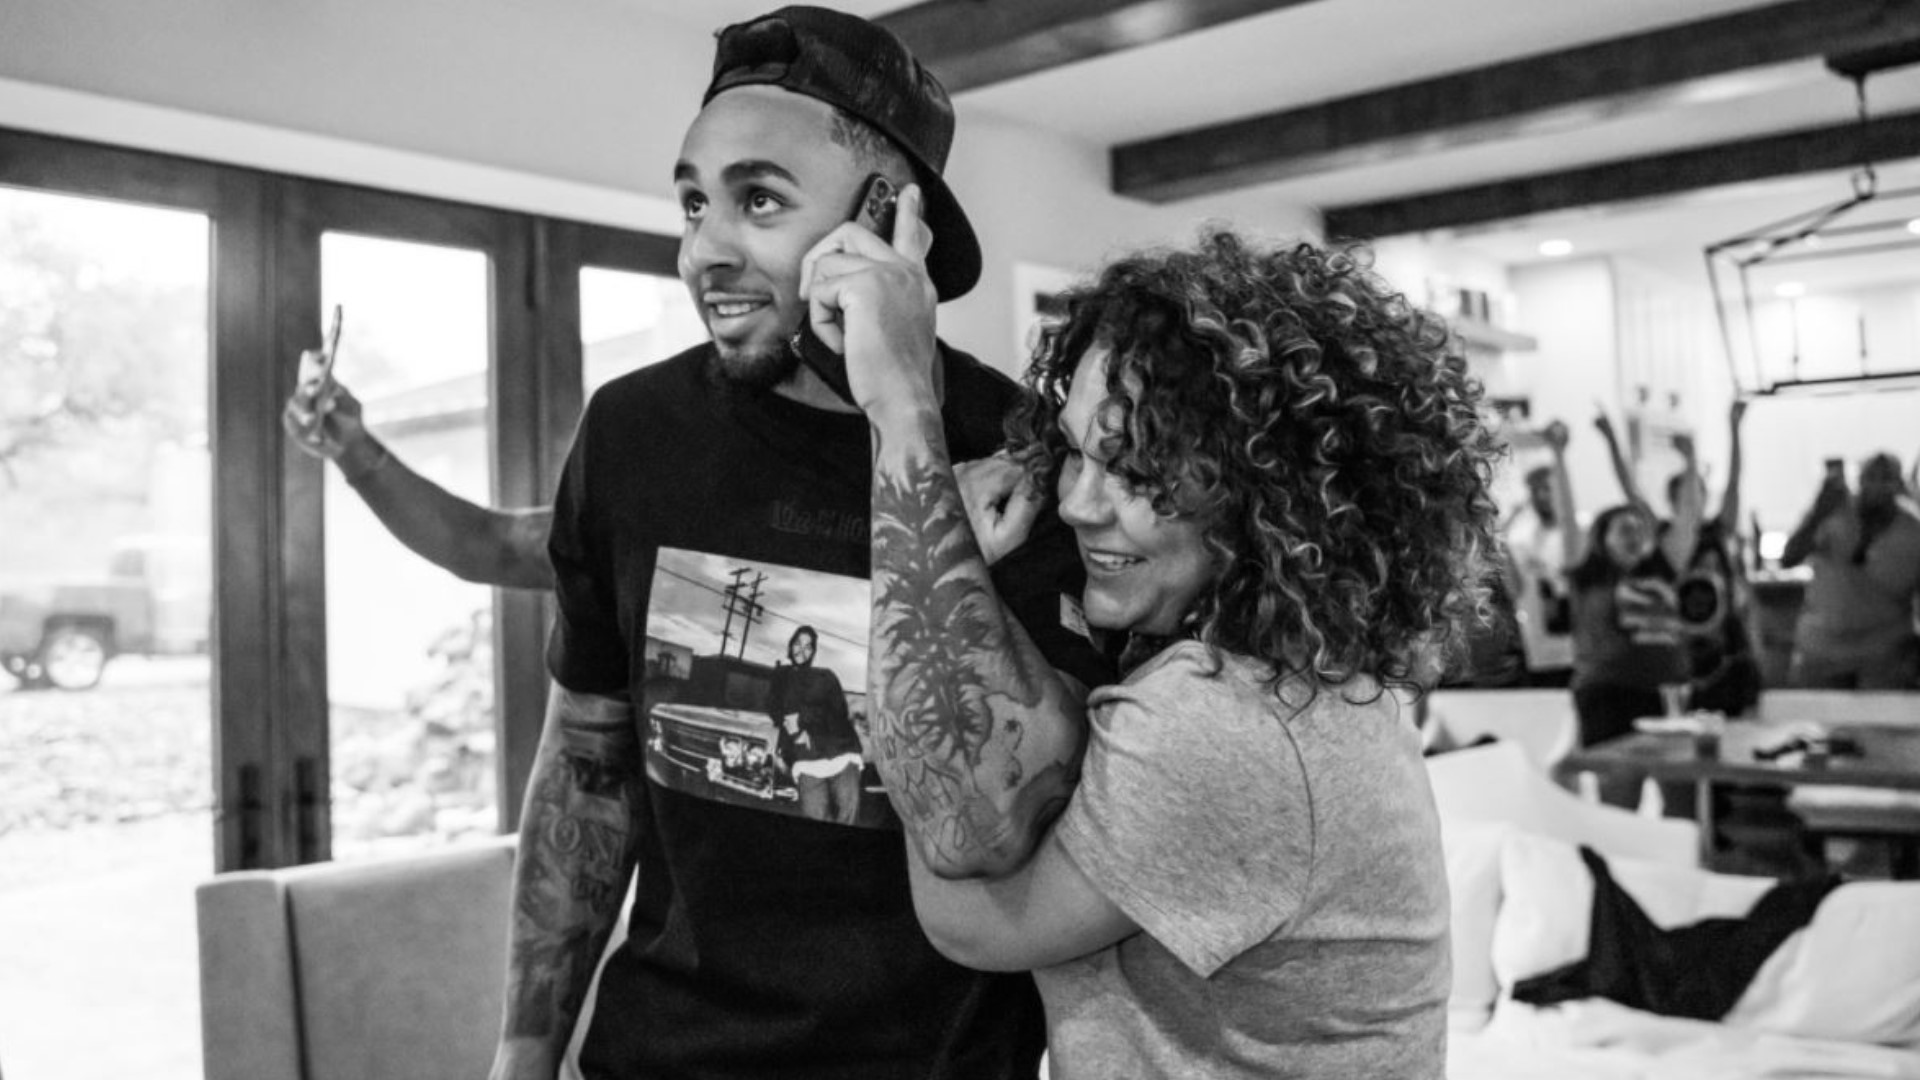 The Broncos' 5th round draft pick out of Texas has no shame in being a Mama's Boy. Caden Sterns owes his success and gratitude to his mother.